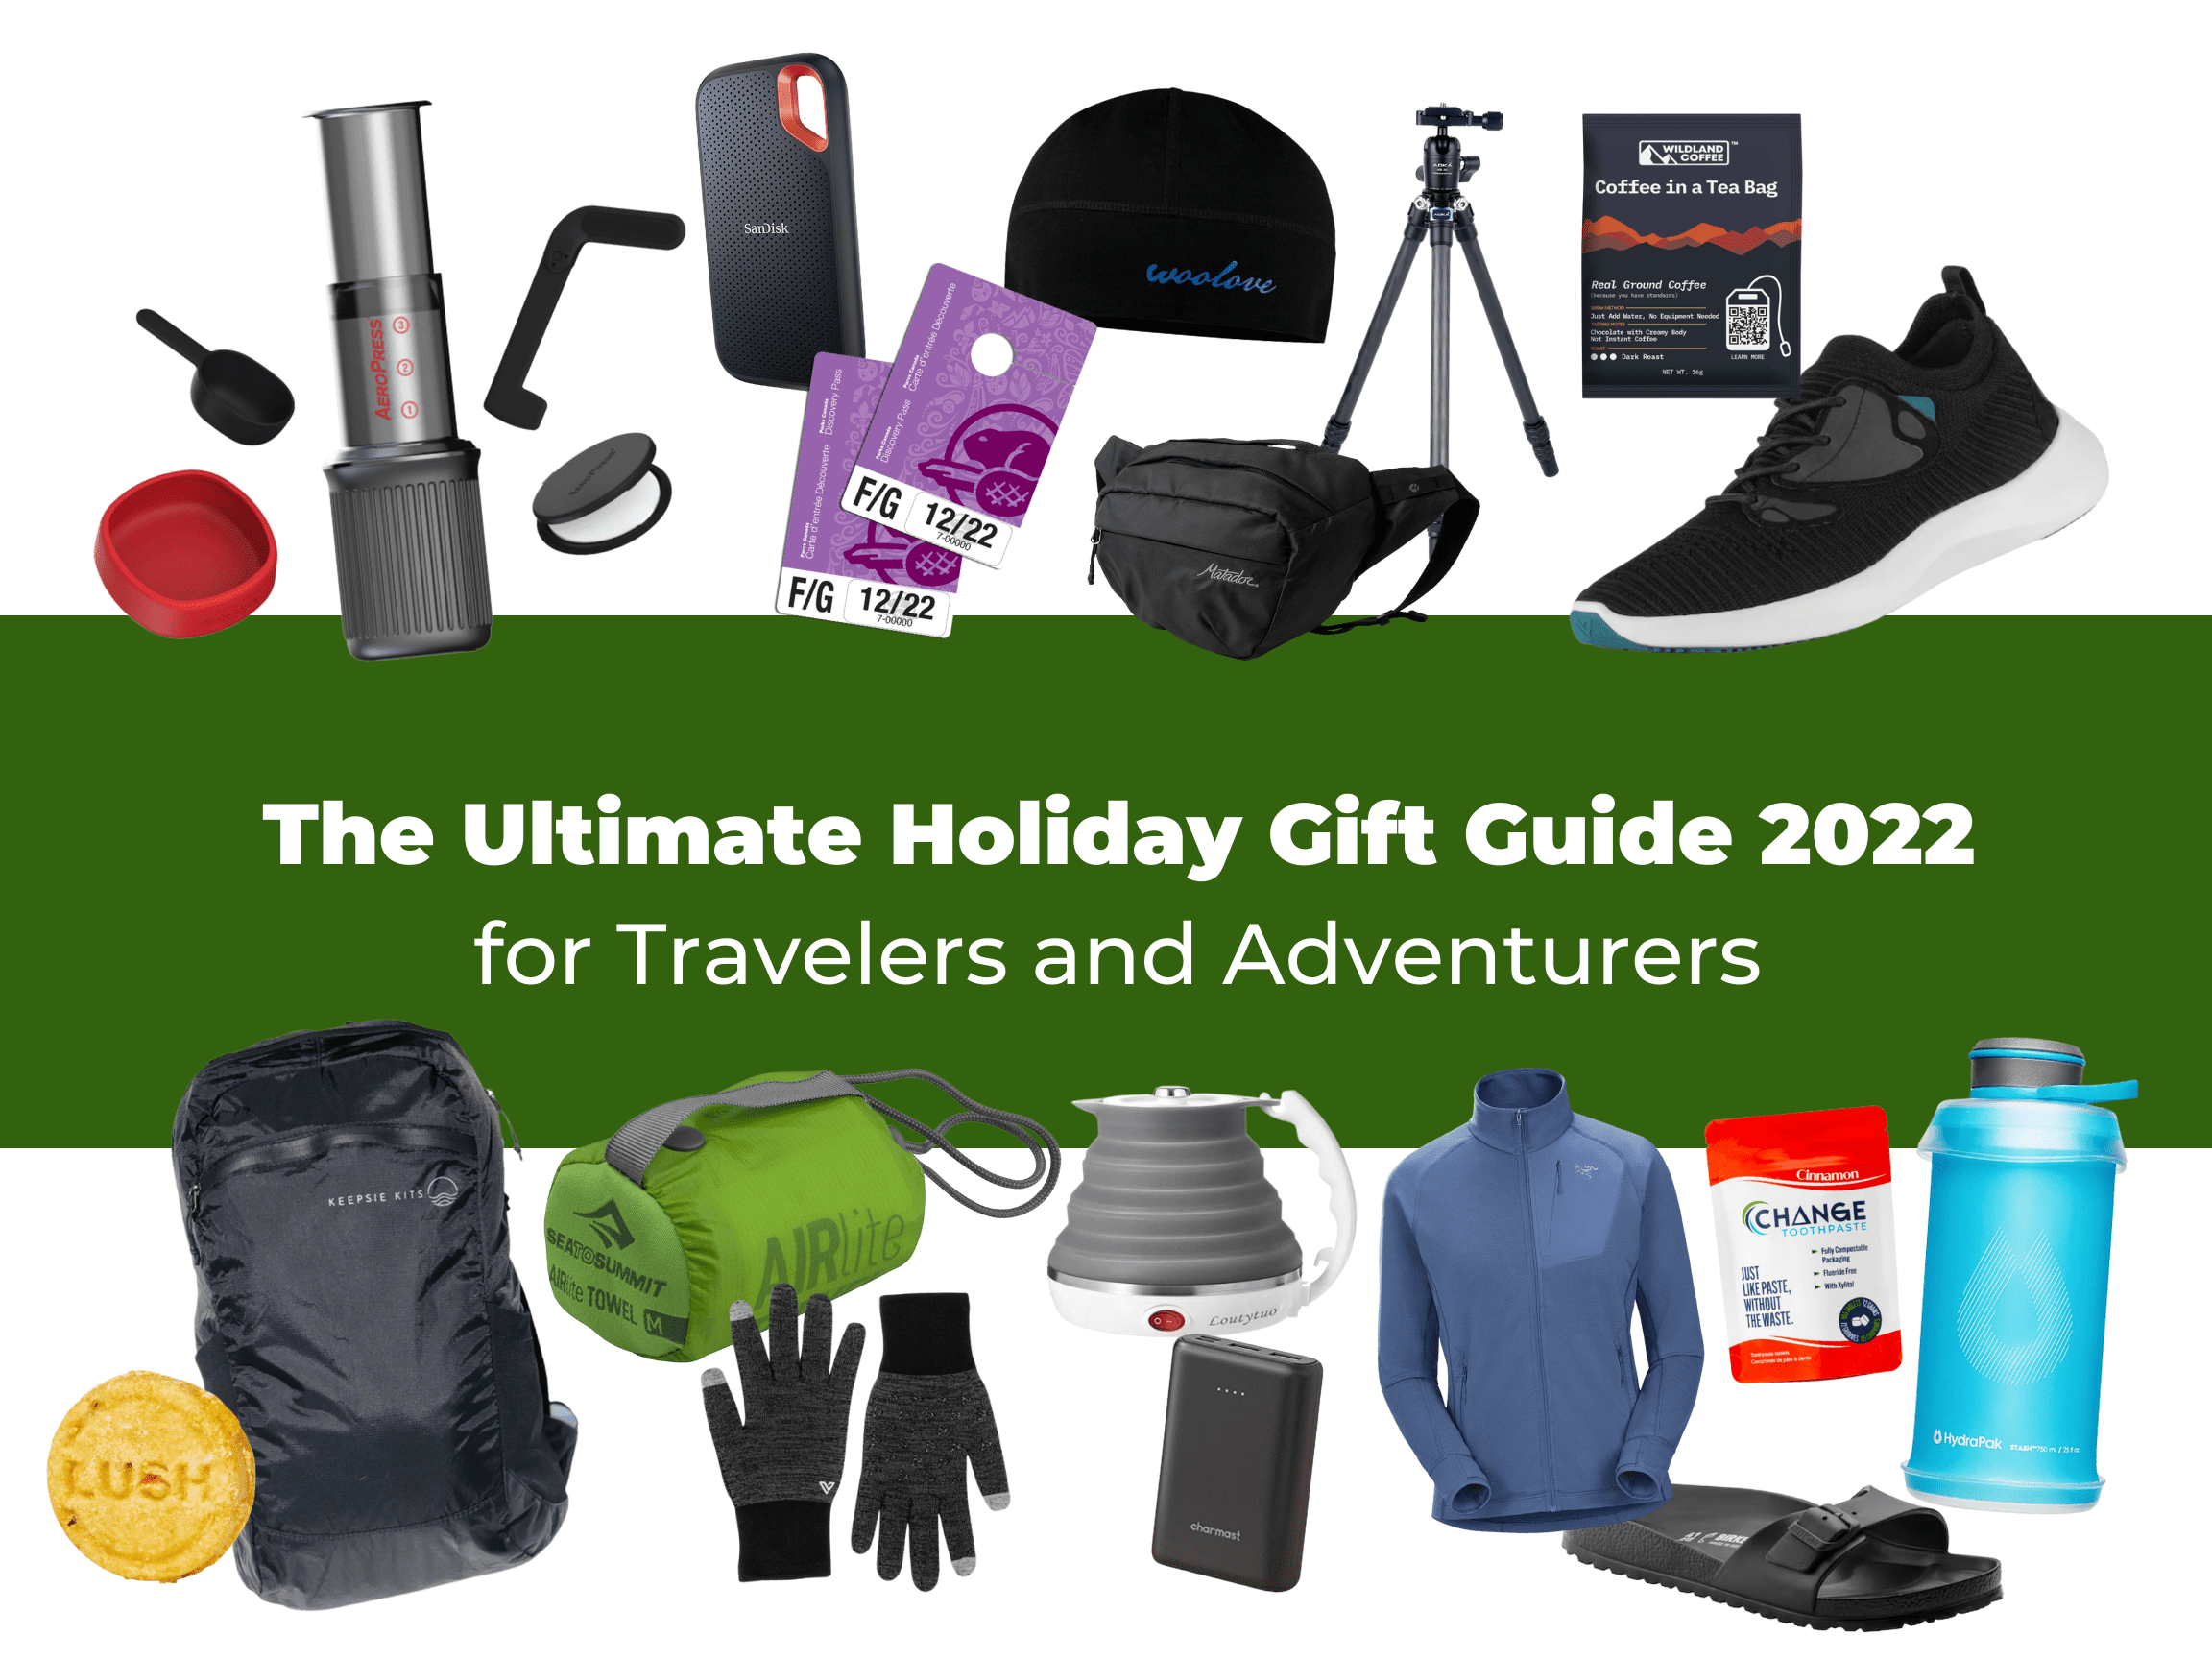 2023 Holiday Gift Guide: 17 Awesome New Travel Gadgets – Wandering Wheatleys